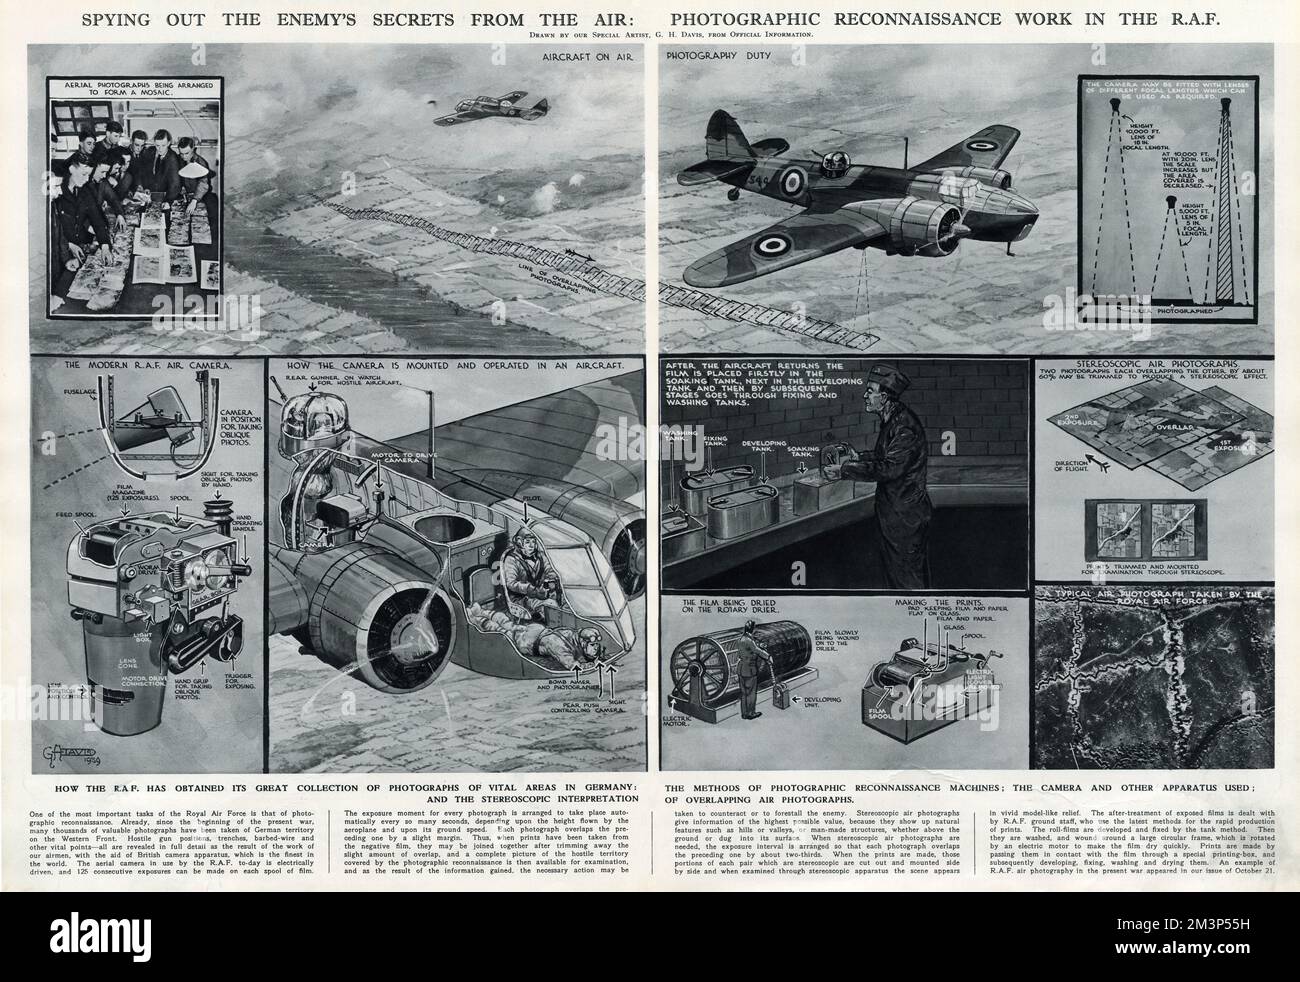 Spying out the enemy's secrets from the air: photographic reconnaissance work in the RAF.  How the RAF has obtained its great collection of photographs of vital areas in Germany: the methods of photographic reconnaissance machines; the camera and other apparatus used; and the stereoscopic interpretation of overlapping air photographs.      Date: 1939 Stock Photo